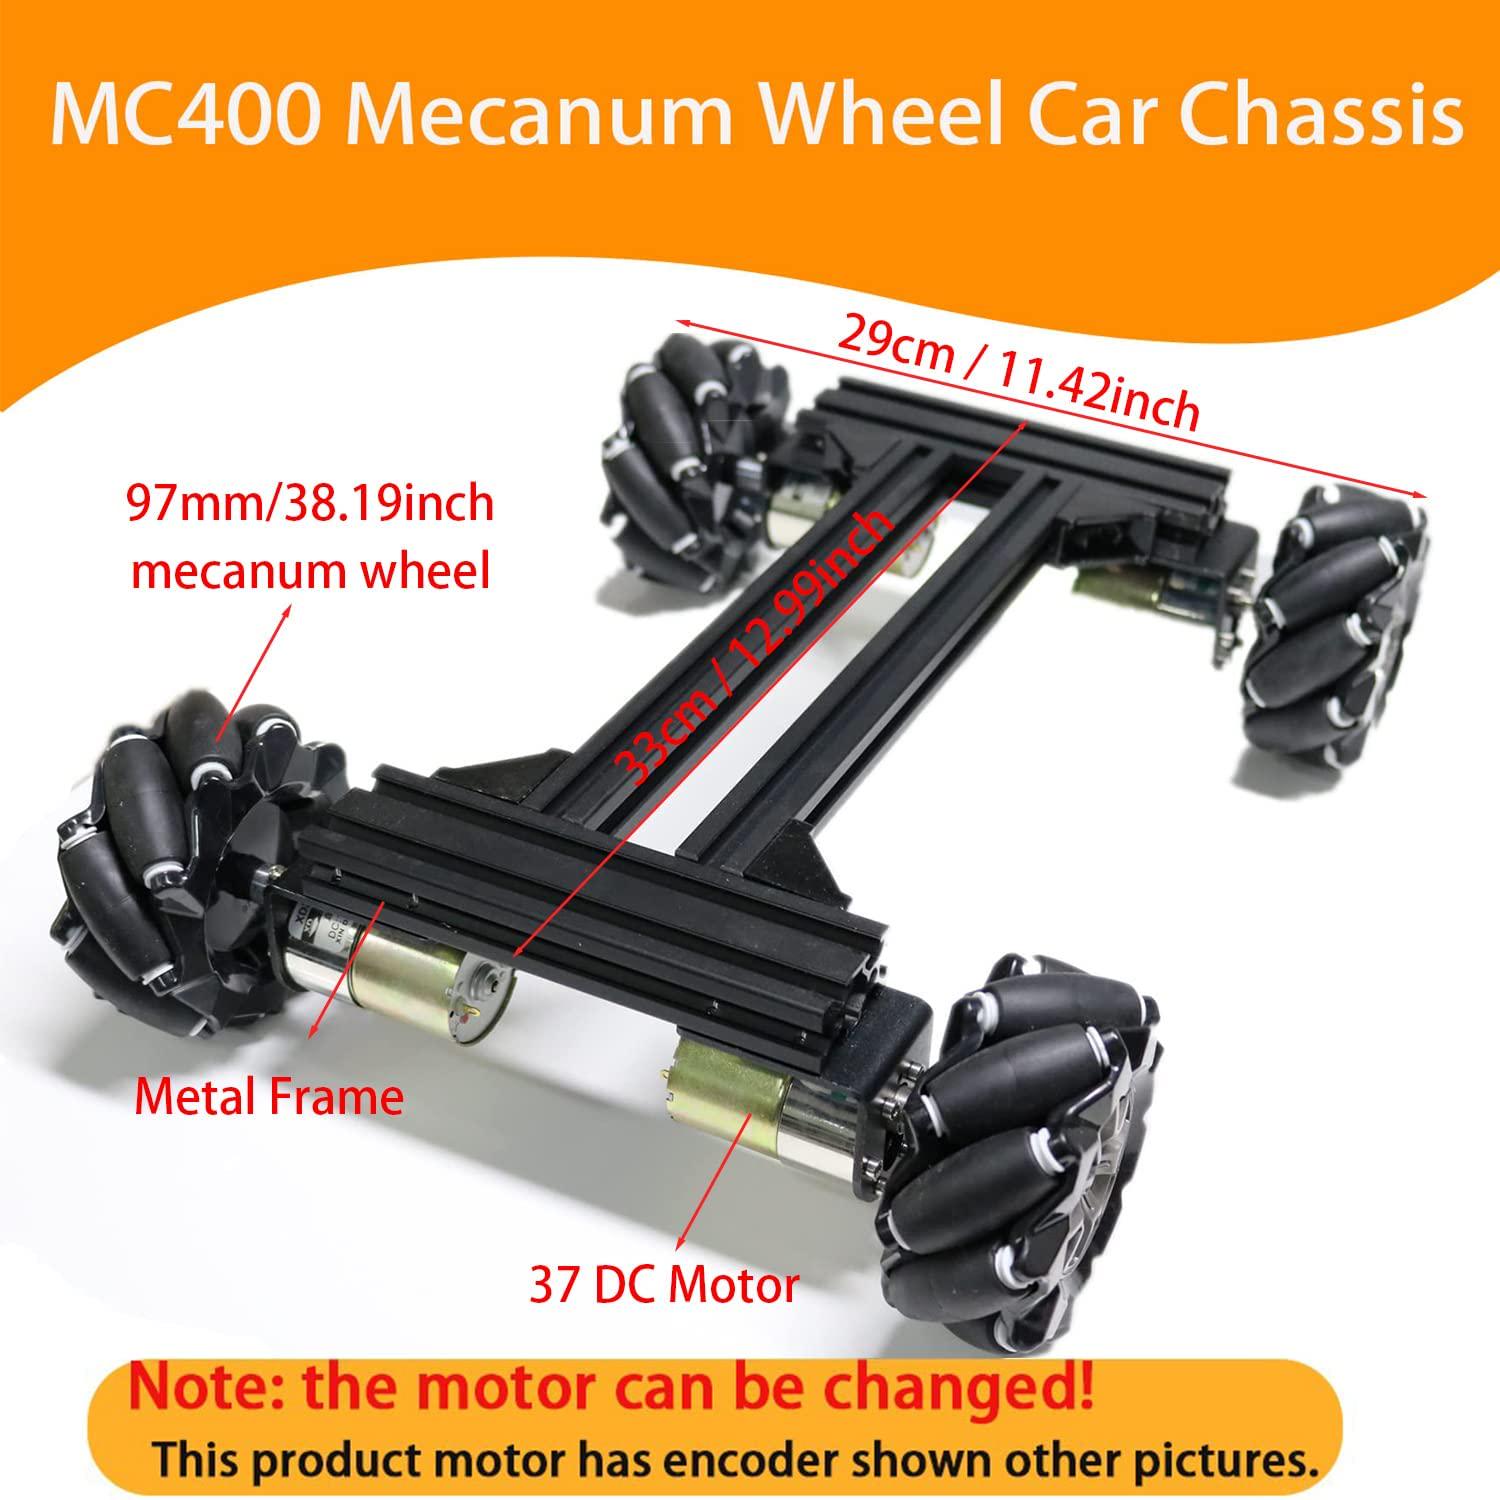 Swaytail, Mecanum Wheel 4wd Metal Robot Car Chassis Remote Control Learning Kit for Arduino Raspberry Pie Microbit with DC Encoder Motor, DIY Steam AGV ROS AI Move Education Platform Robotic Functional Model